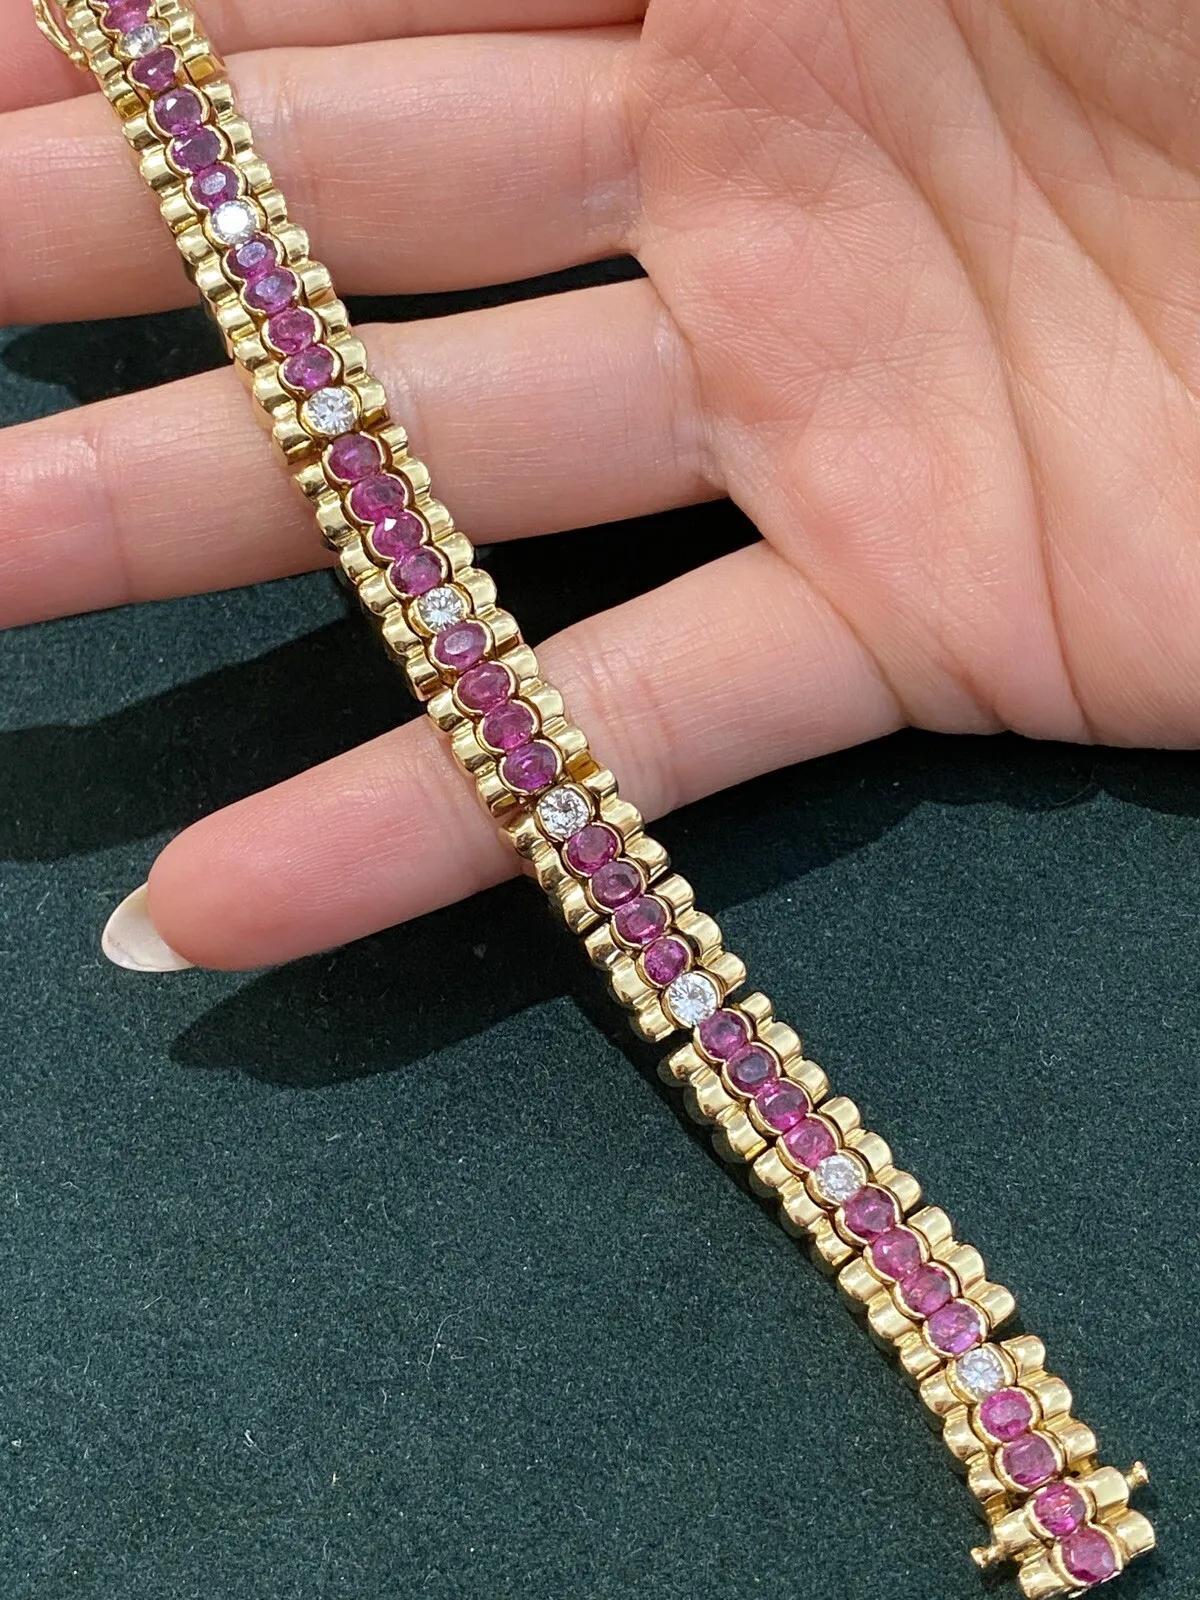 Vintage Ruby and Diamond Bracelet In 18K Yellow Gold

Ruby and Diamond Bracelet features 37 Oval Red Rubies and 8 Round Brilliant cut Diamonds set in an alternating pattern in a single row in 18K Yellow Gold.

Total ruby weight is 7 carats